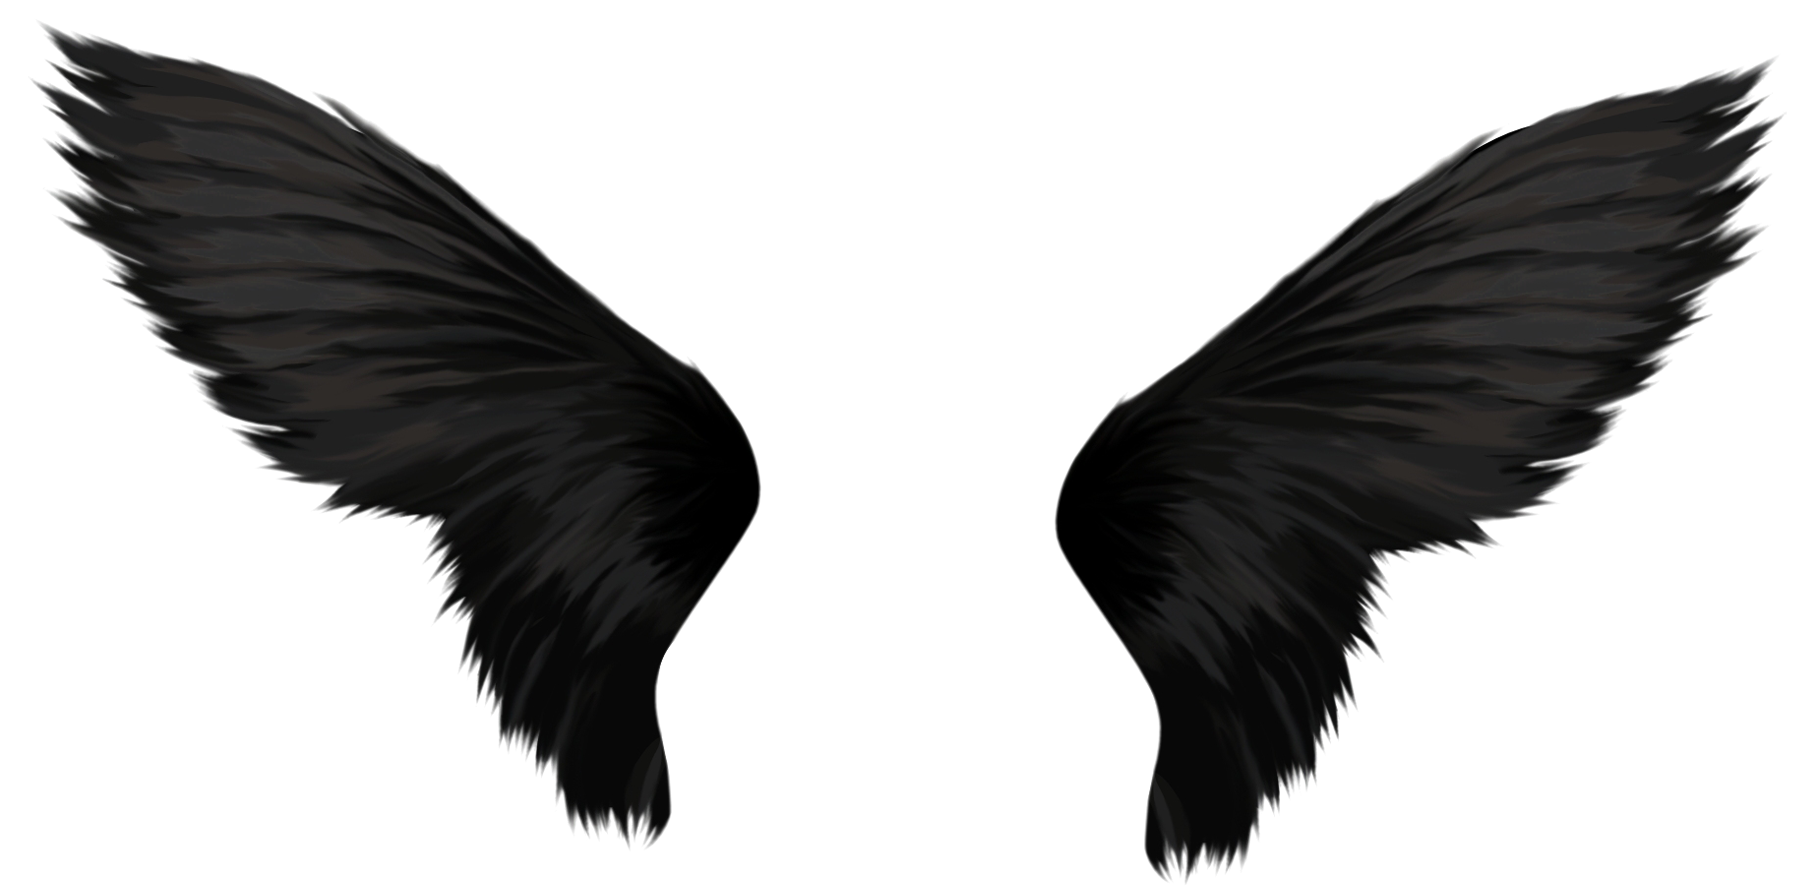 Demon Wings Vista lateral Free PNG Image